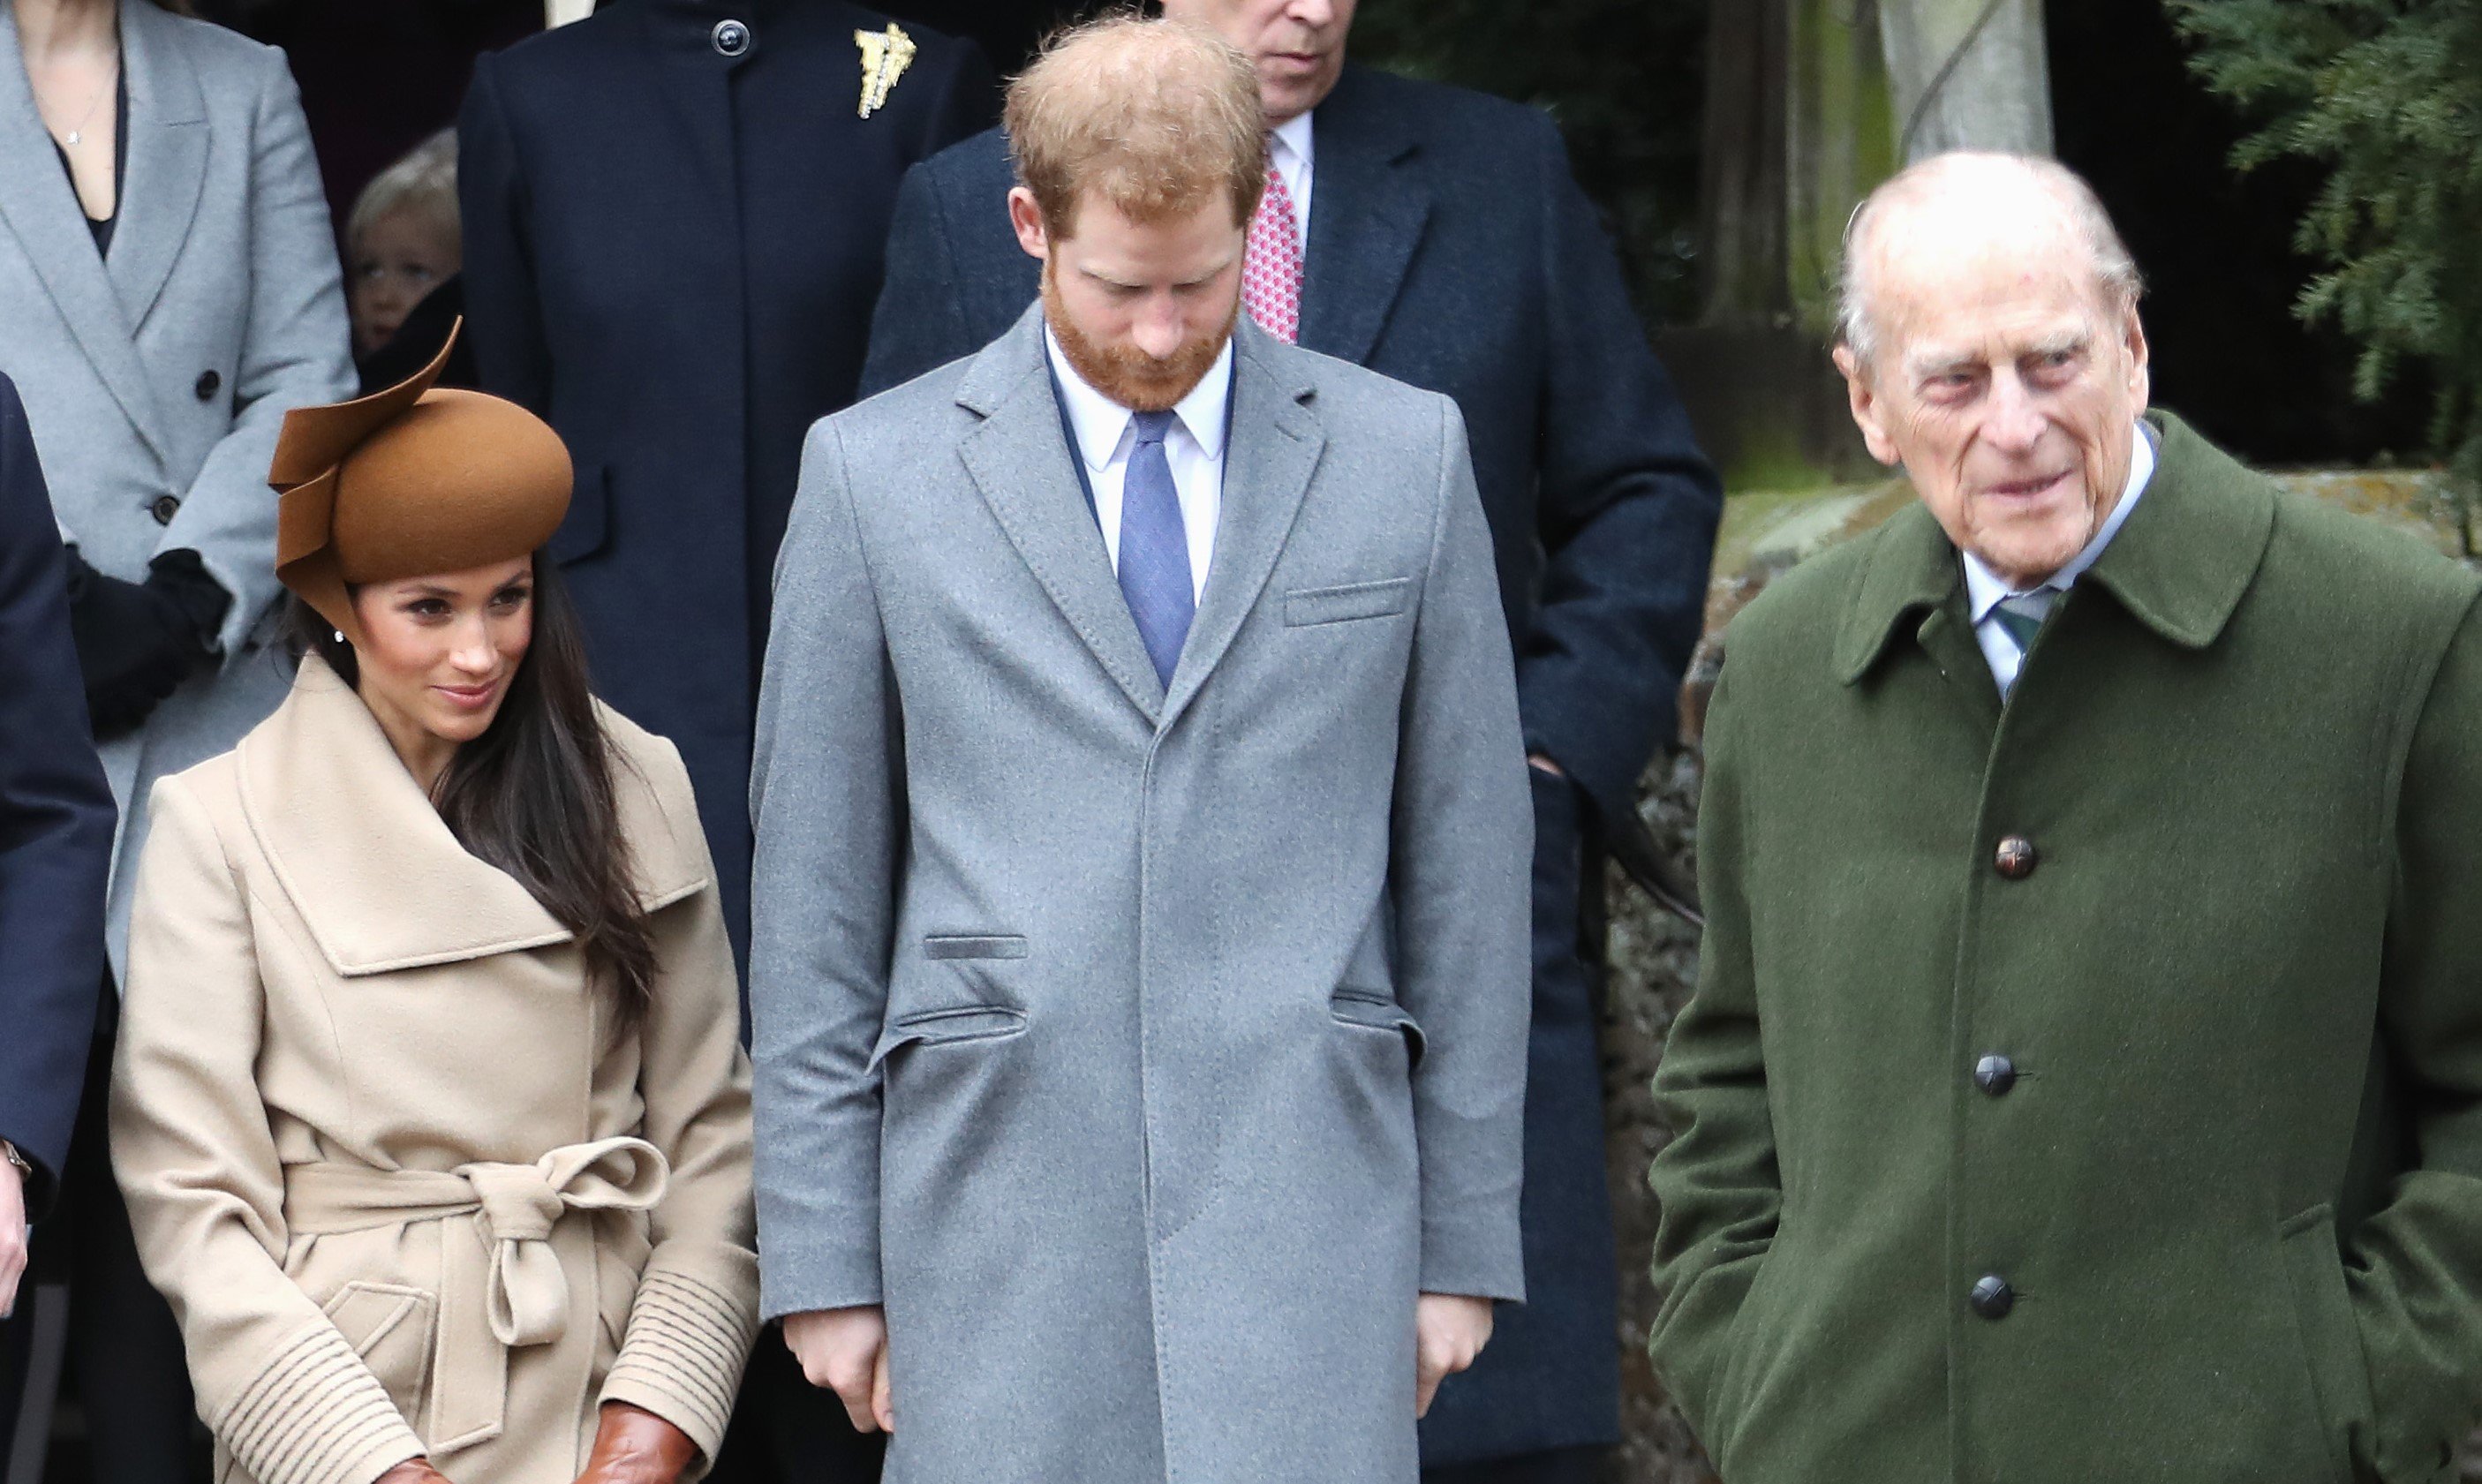 Meghan Markle, Prince Harry, and Prince Philip standing outside Church of St Mary Magdalene following Christmas Day Service in 2017